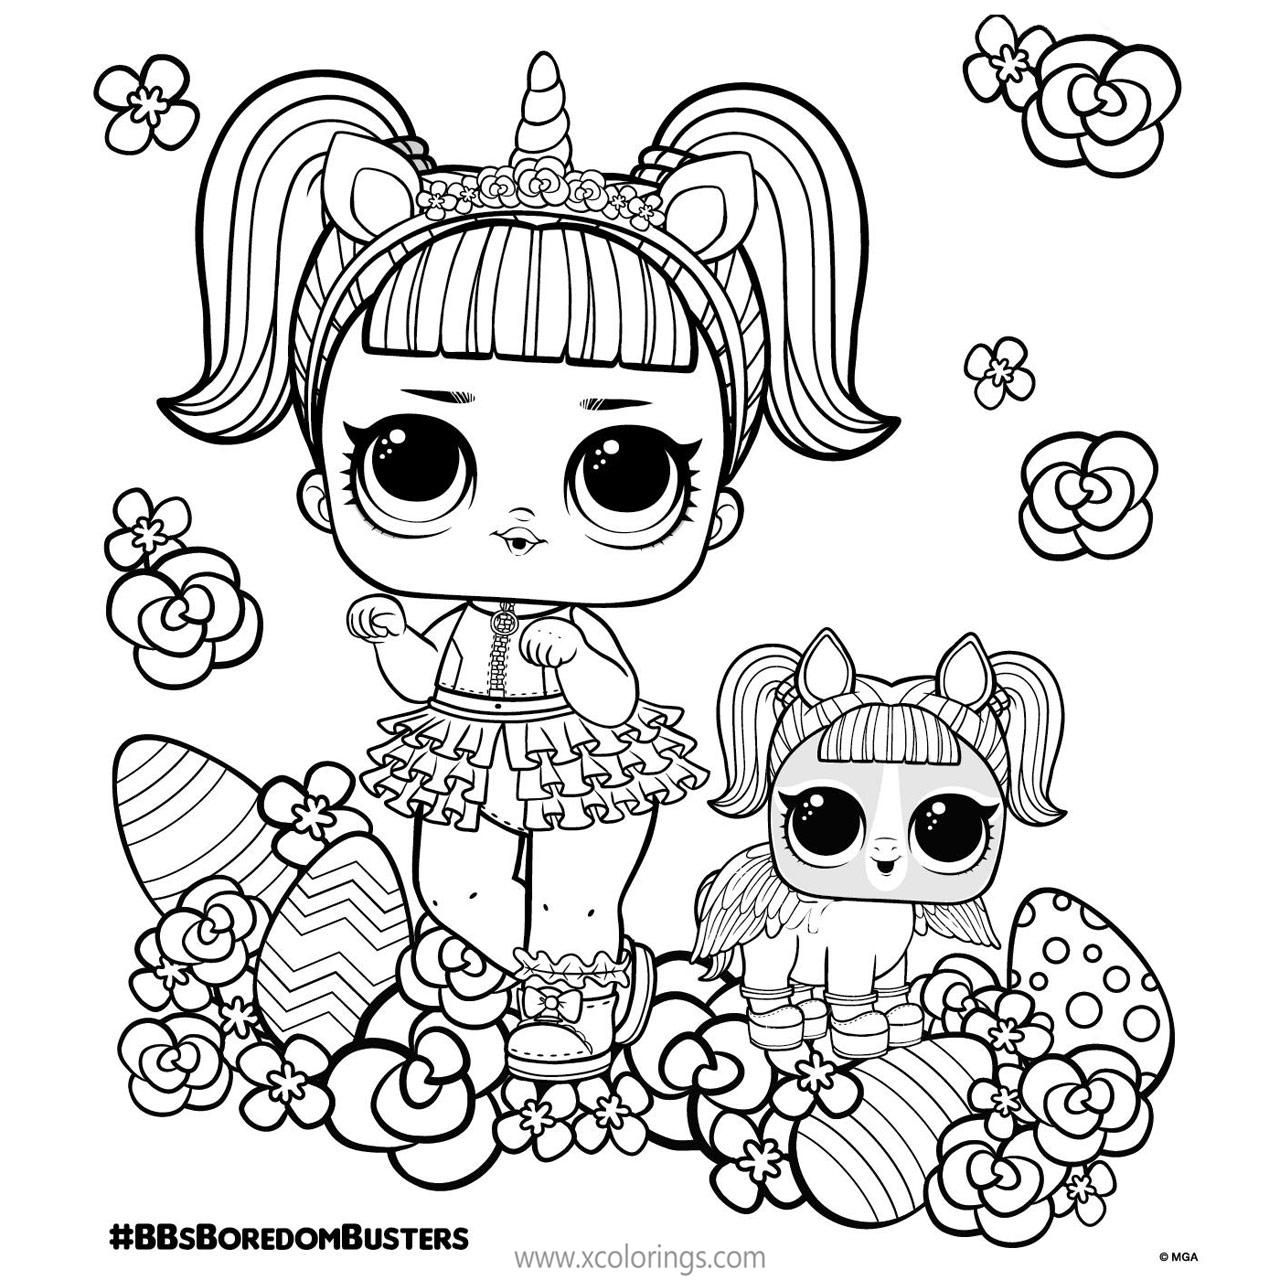 LOL Unicorn Coloring Pages Doll and Pet for Easter. | Unicorn coloring pages,  Cool coloring pages, Easter coloring pages